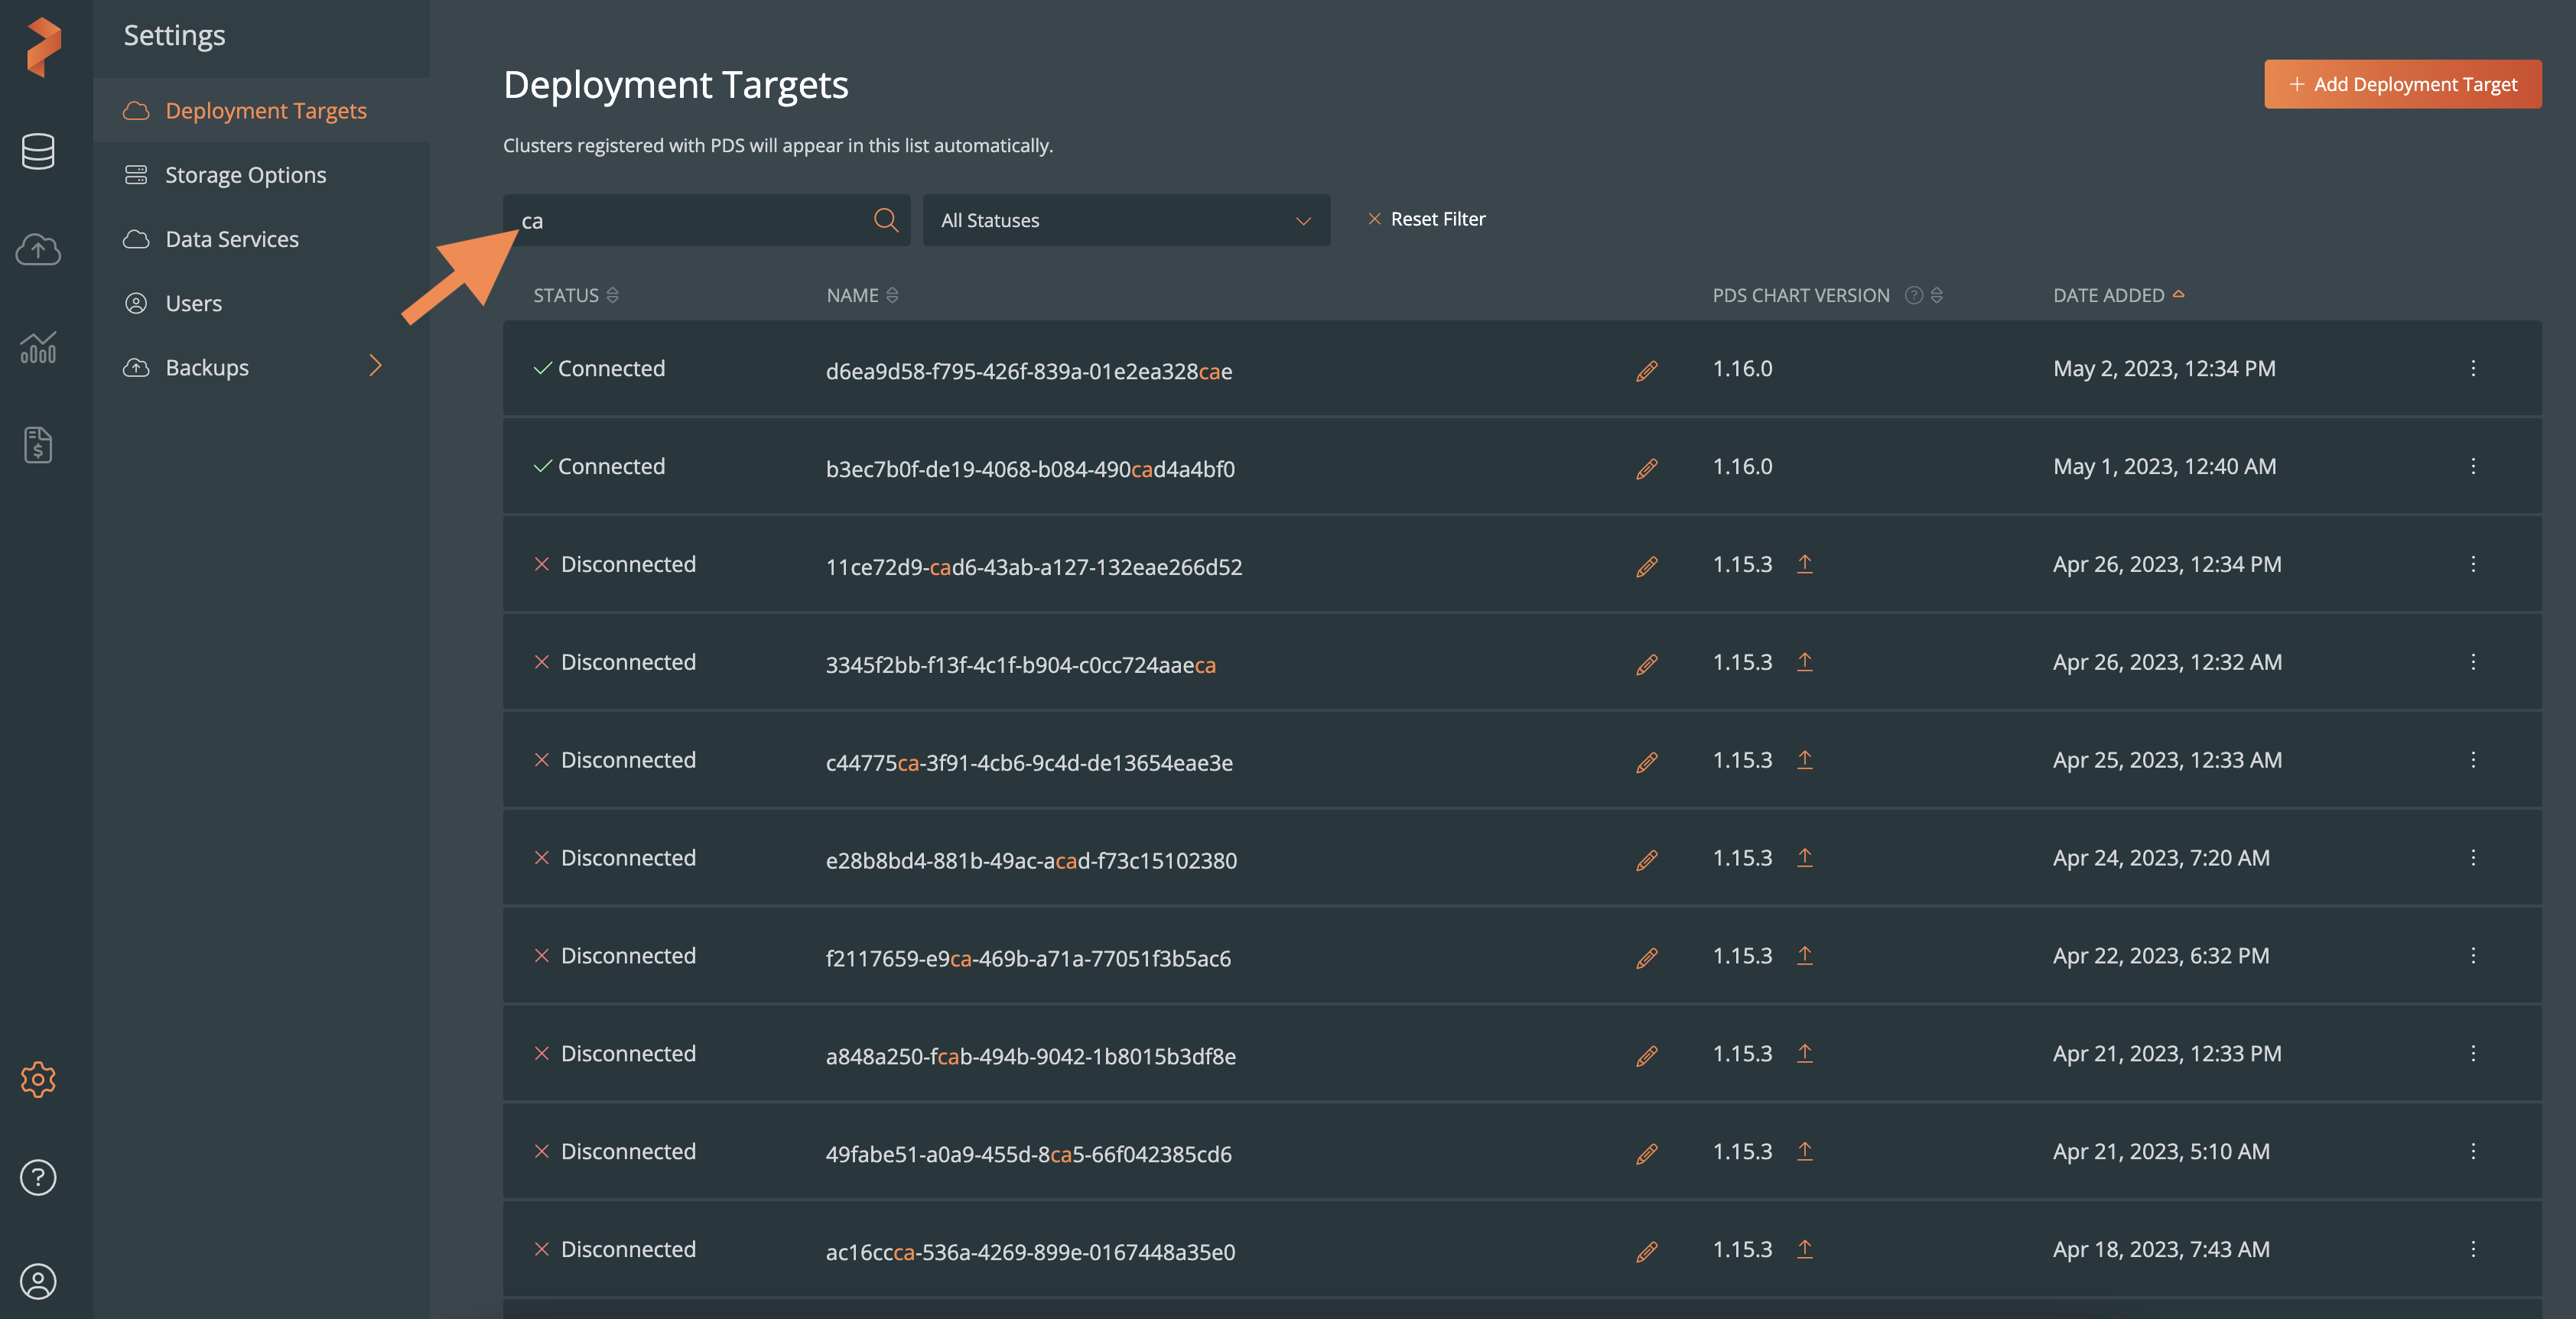 Filter options in the deployment targets page